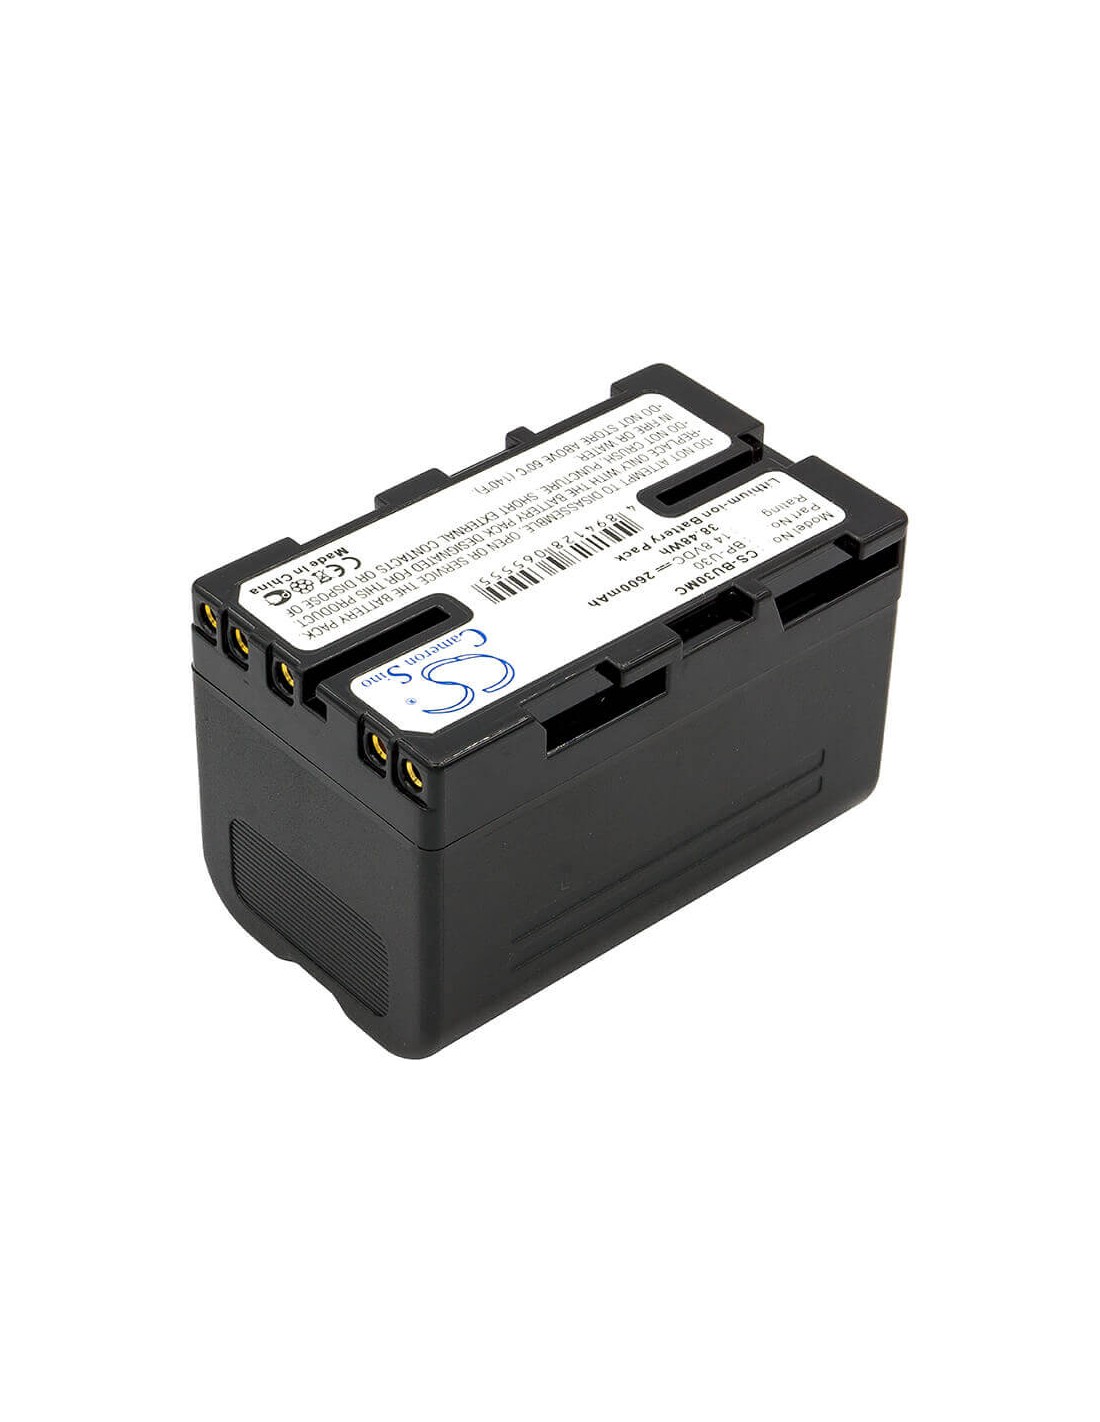 Battery for Sony Pmw-100, Pmw-150, Pmw-160, Pmw-200, 14.8V, 2600mAh - 38.48Wh